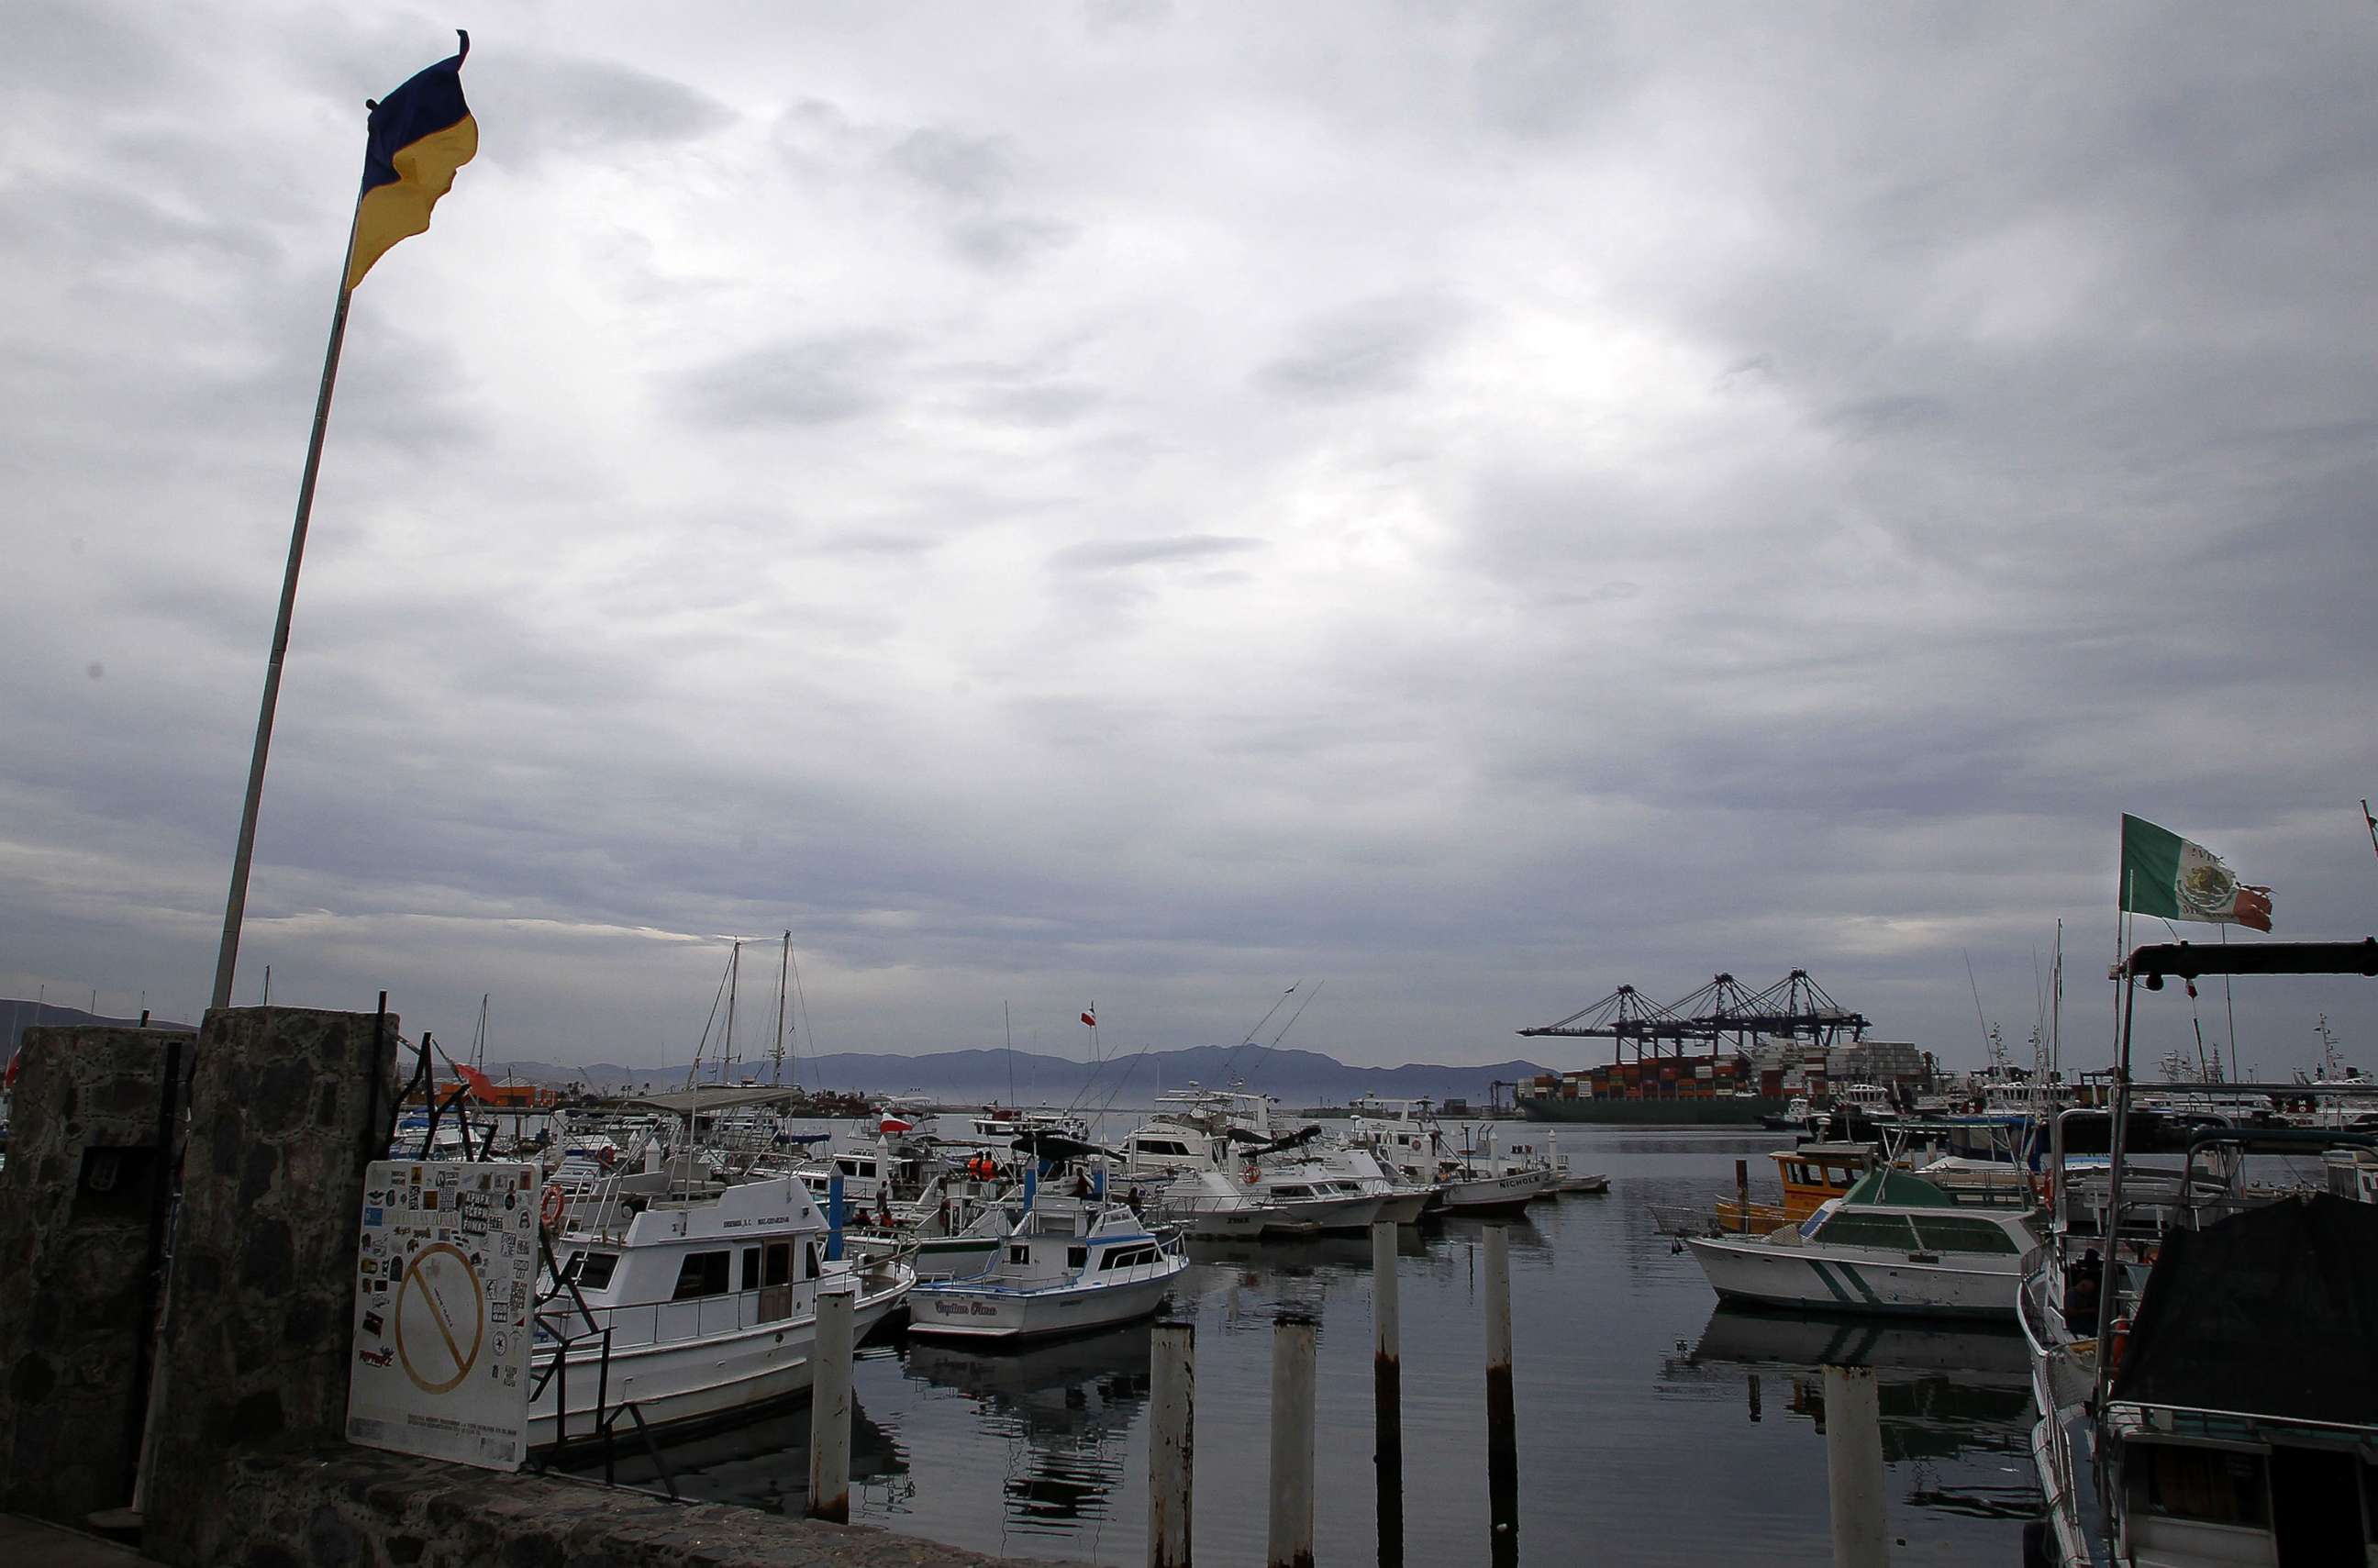 PHOTO: Small boats are moored in port prior to the arrival of Hurricane Kay in the city of Ensenada, Baja California, Mexico, on Sept. 8, 2022.